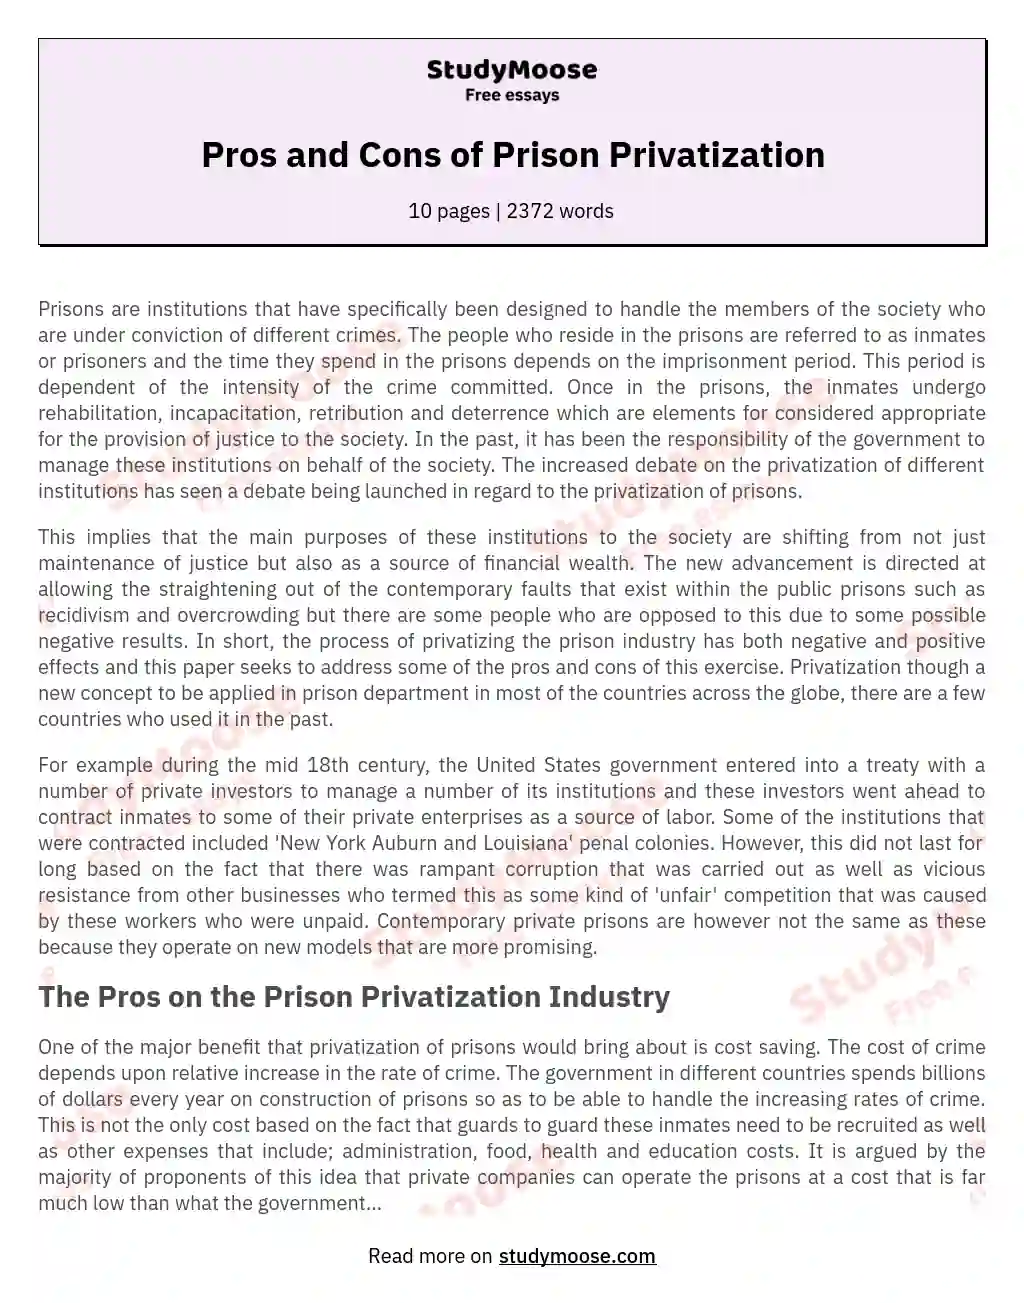 Pros and Cons of Prison Privatization essay